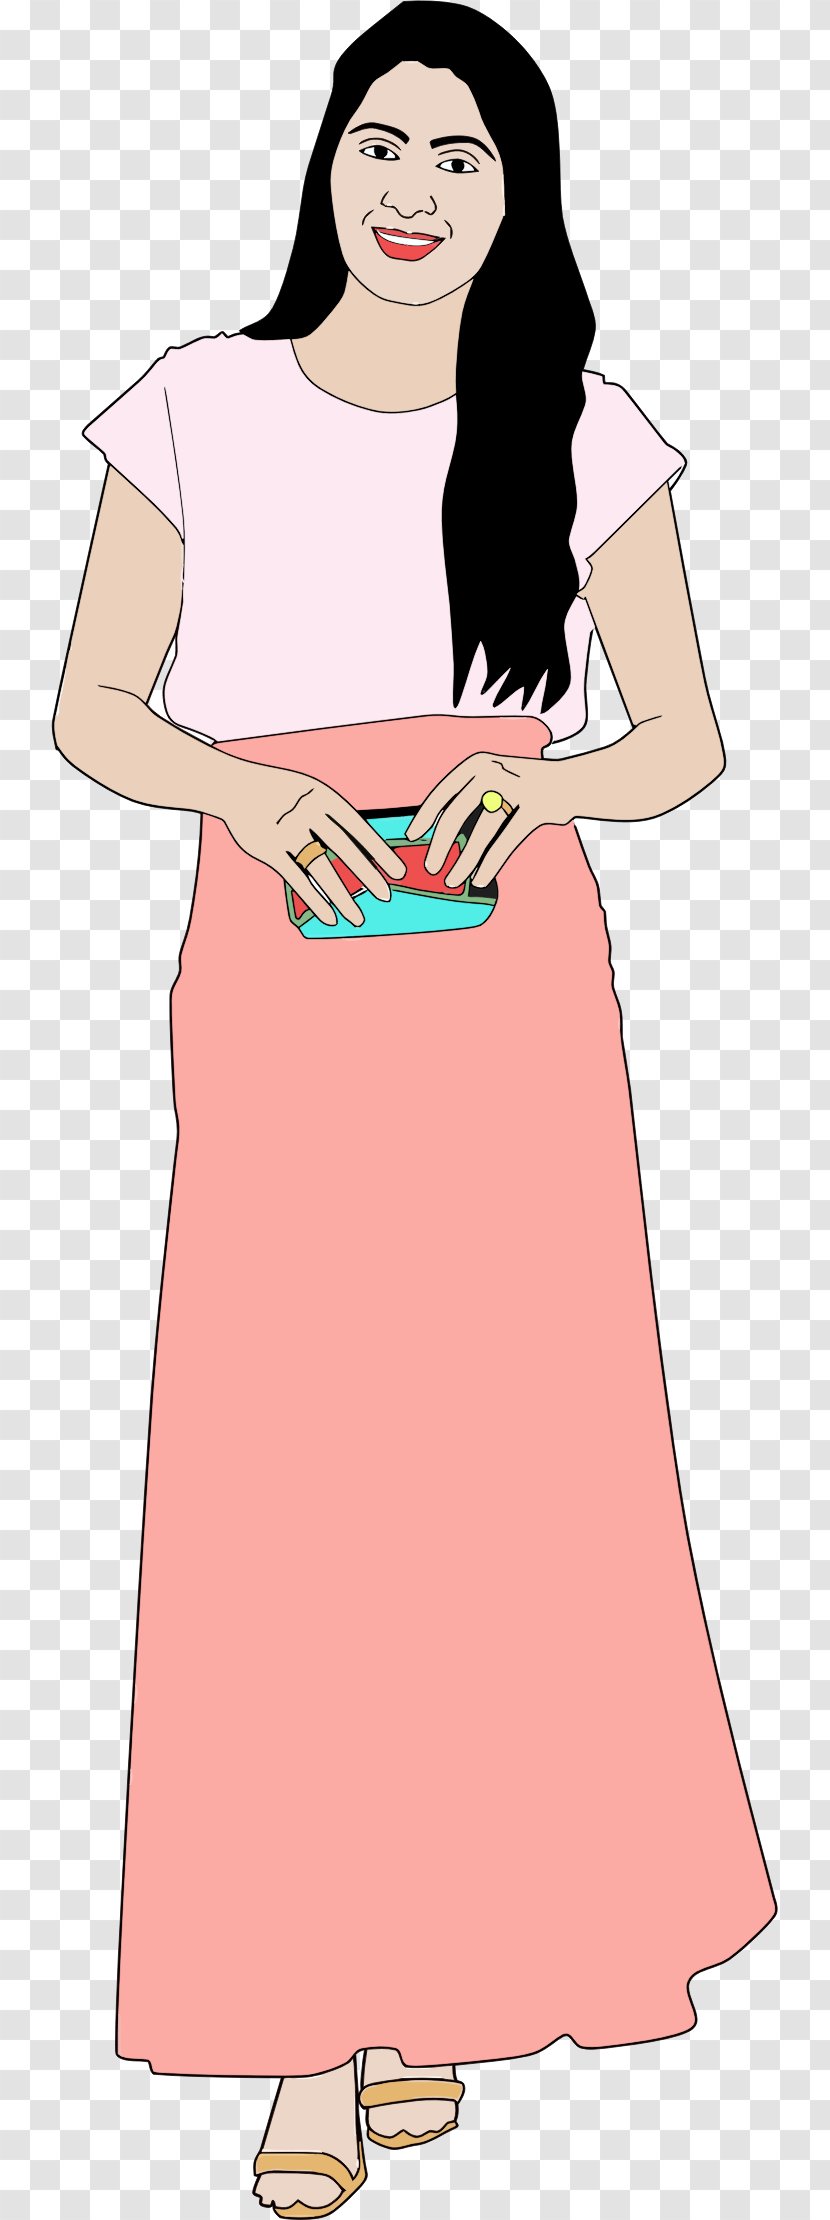 Woman Drawing Photography - Watercolor - Pregnant Women Illustration Transparent PNG